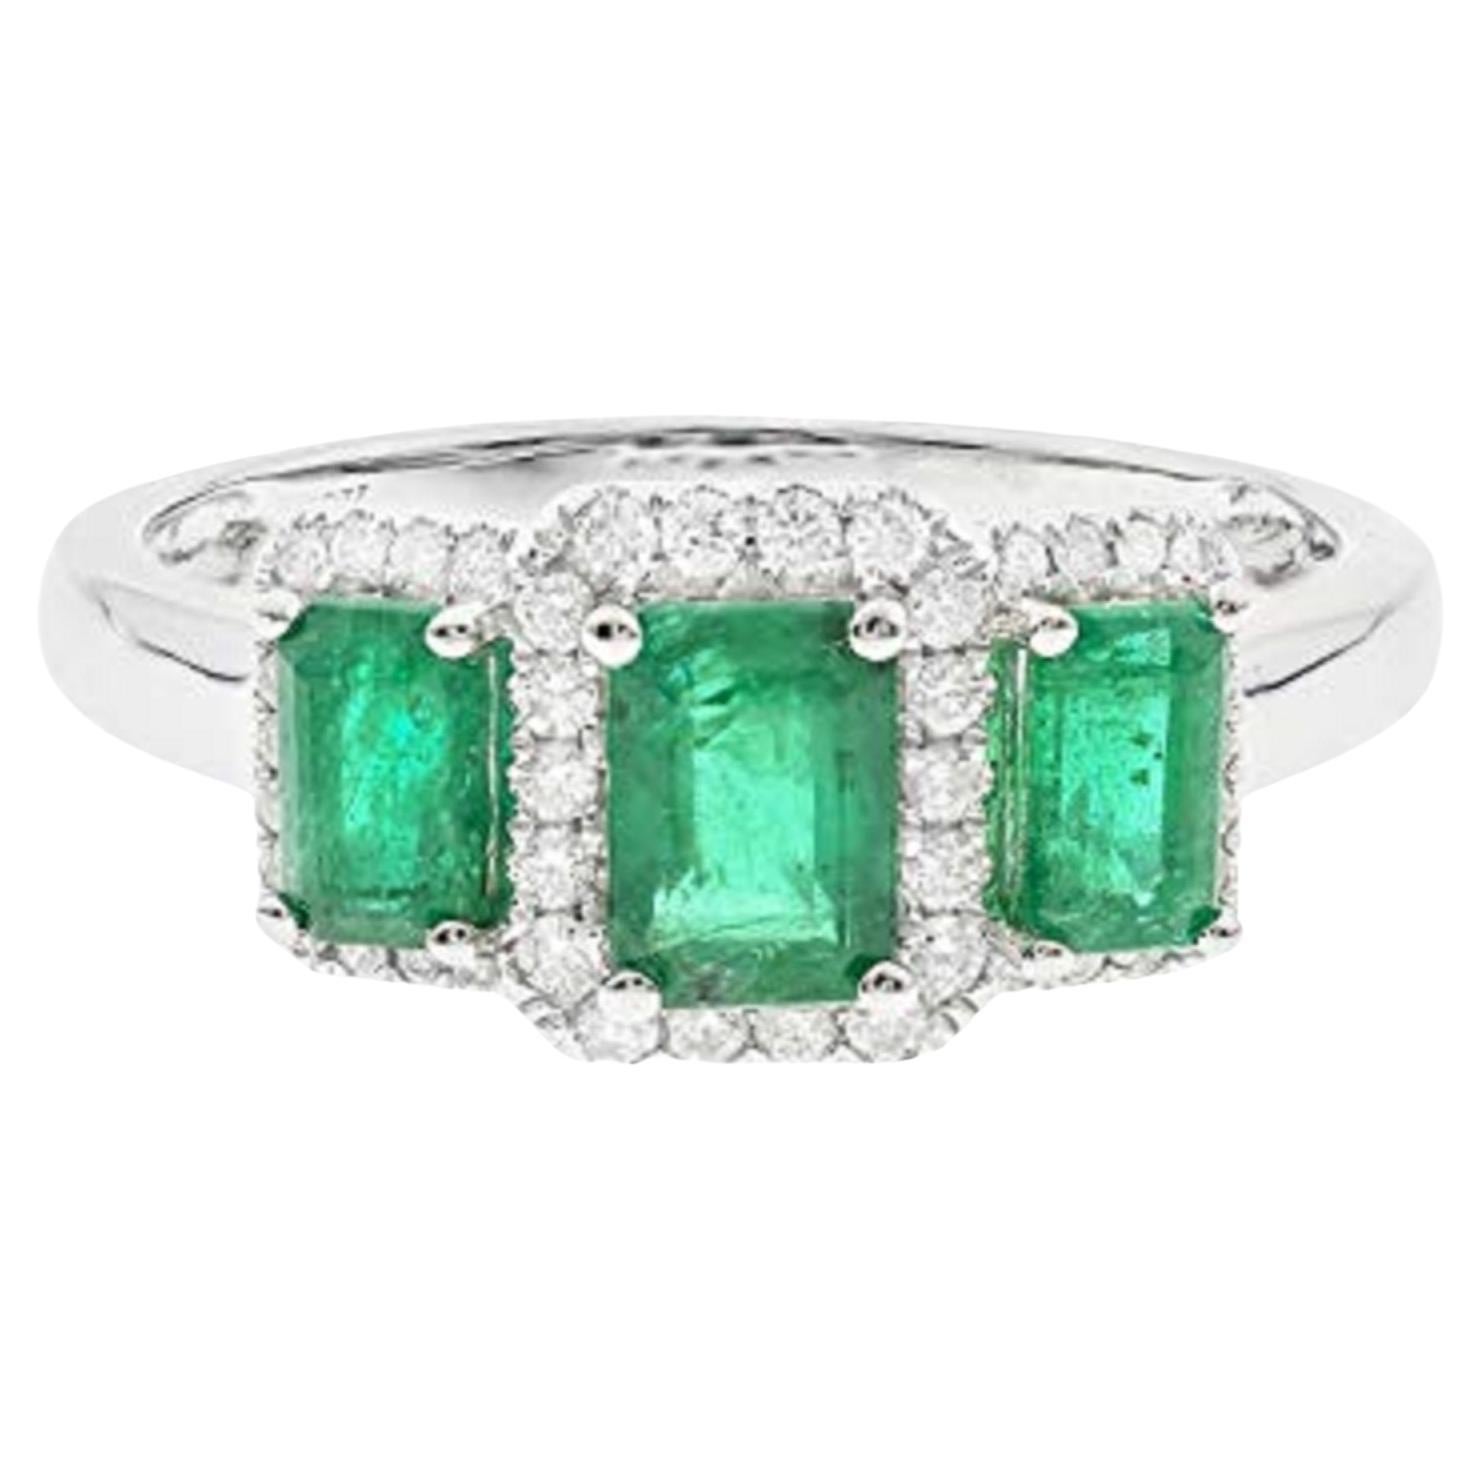 Classic Emerald with Diamond Accents 10k White Gold Ring For Women/Girls